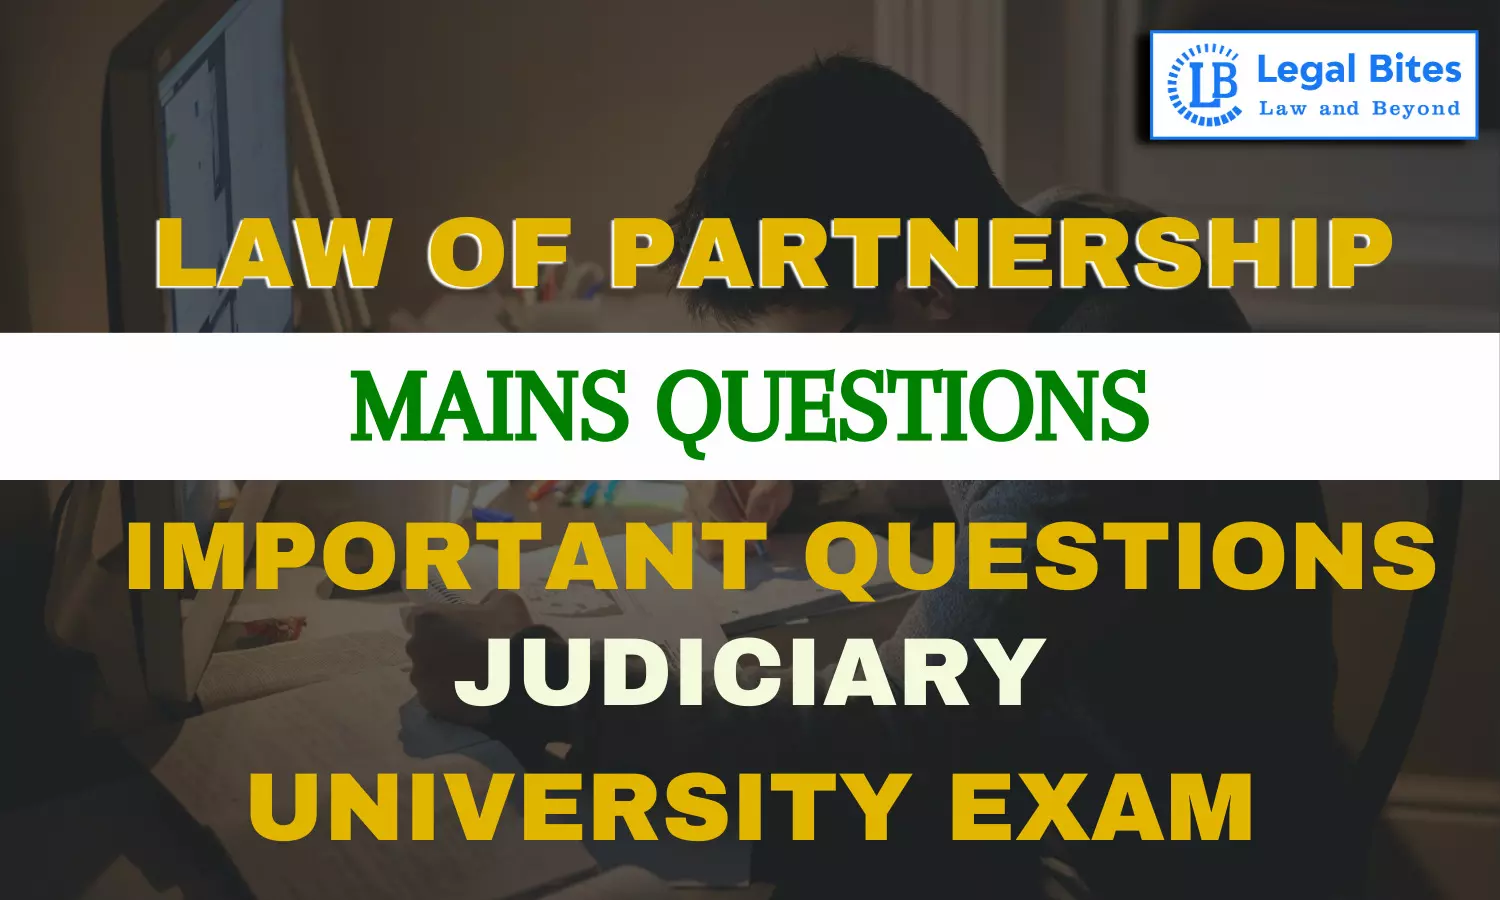 Discuss the liability of a partner for tortious acts of another partner.